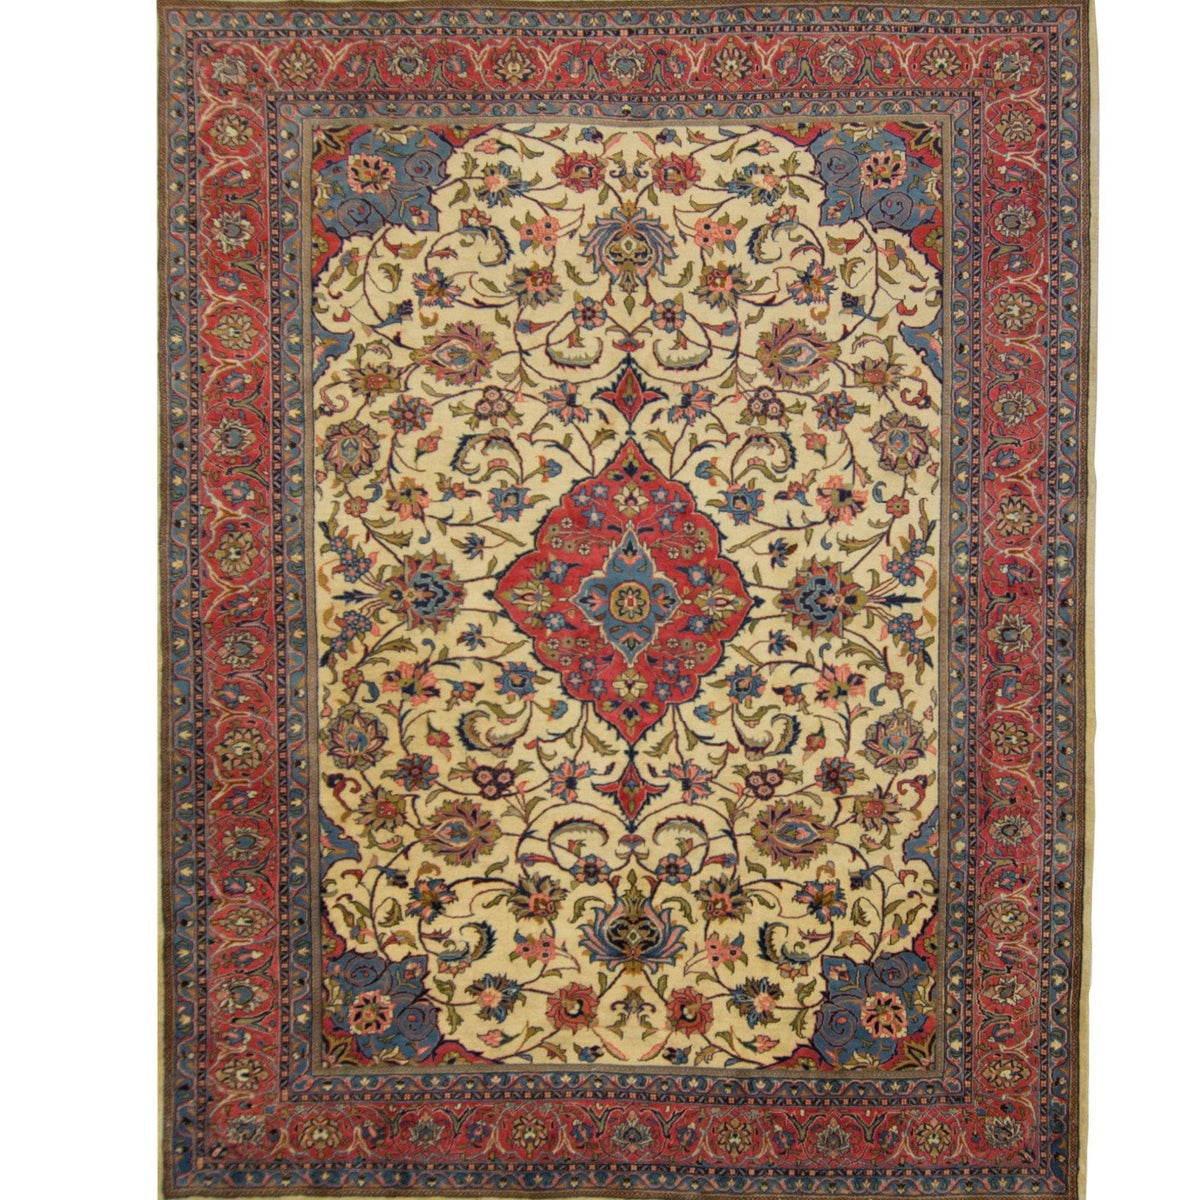 Fine Hand-knotted Wool Persian Saruk Rug 250cm x 333cm